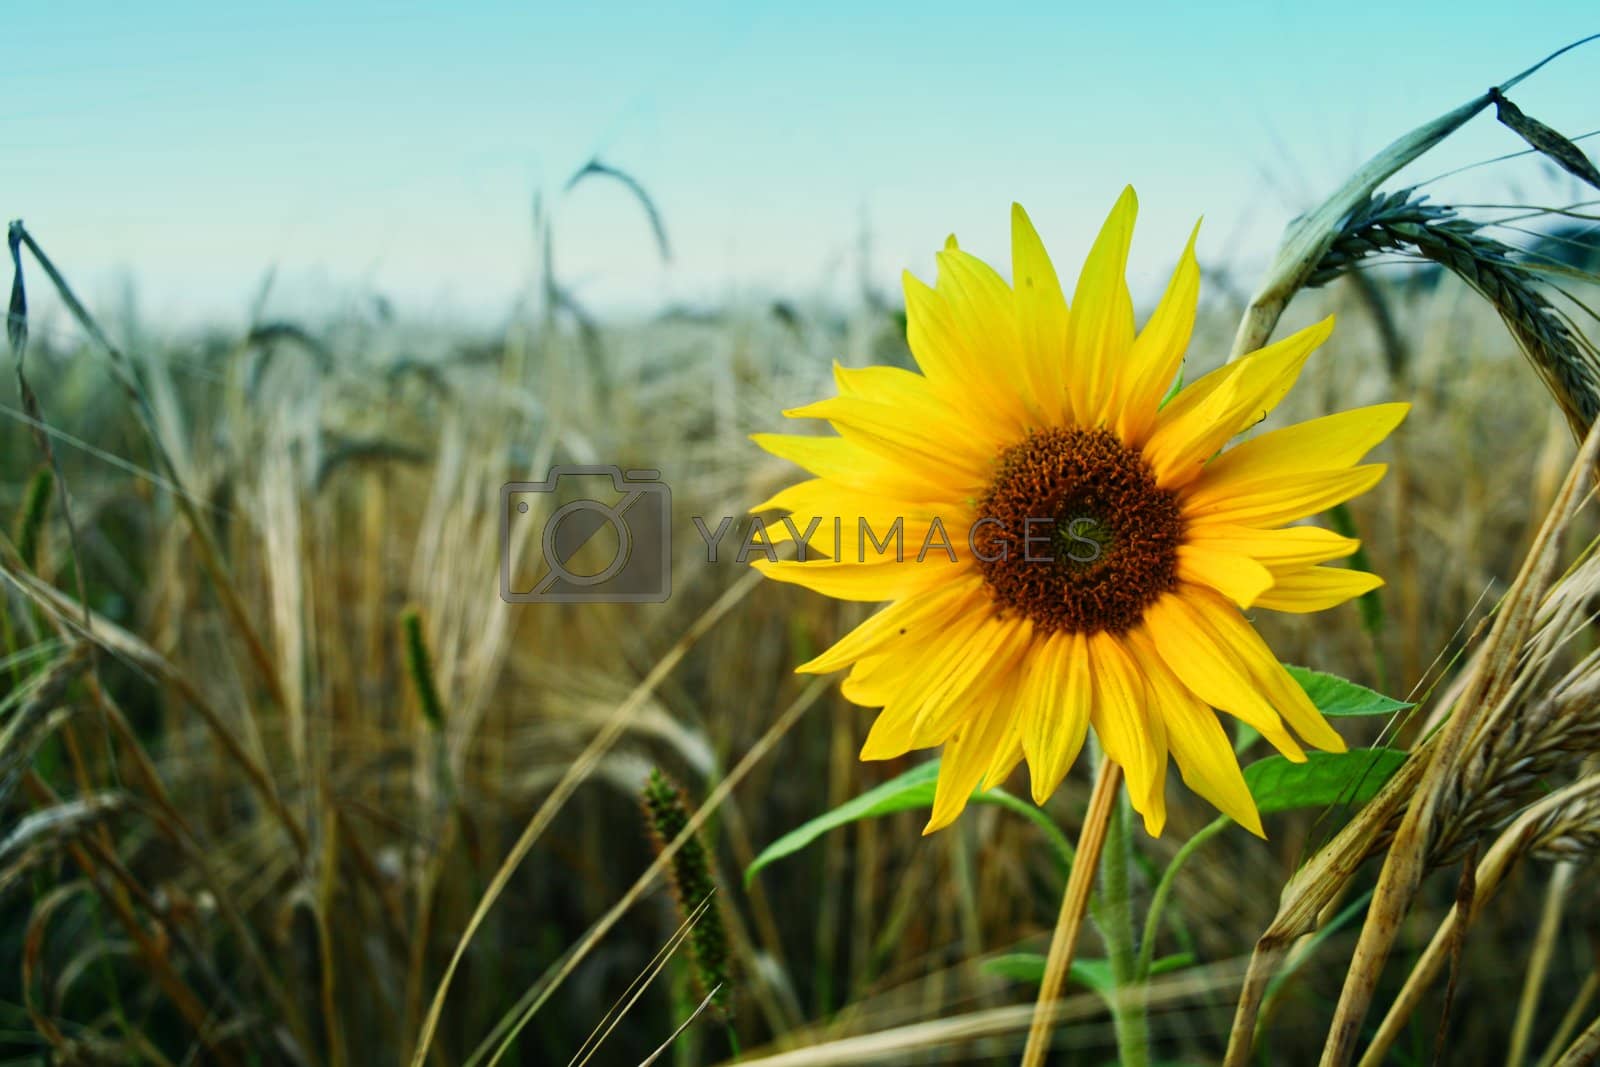 Royalty free image of Solitute sunflower by velkol